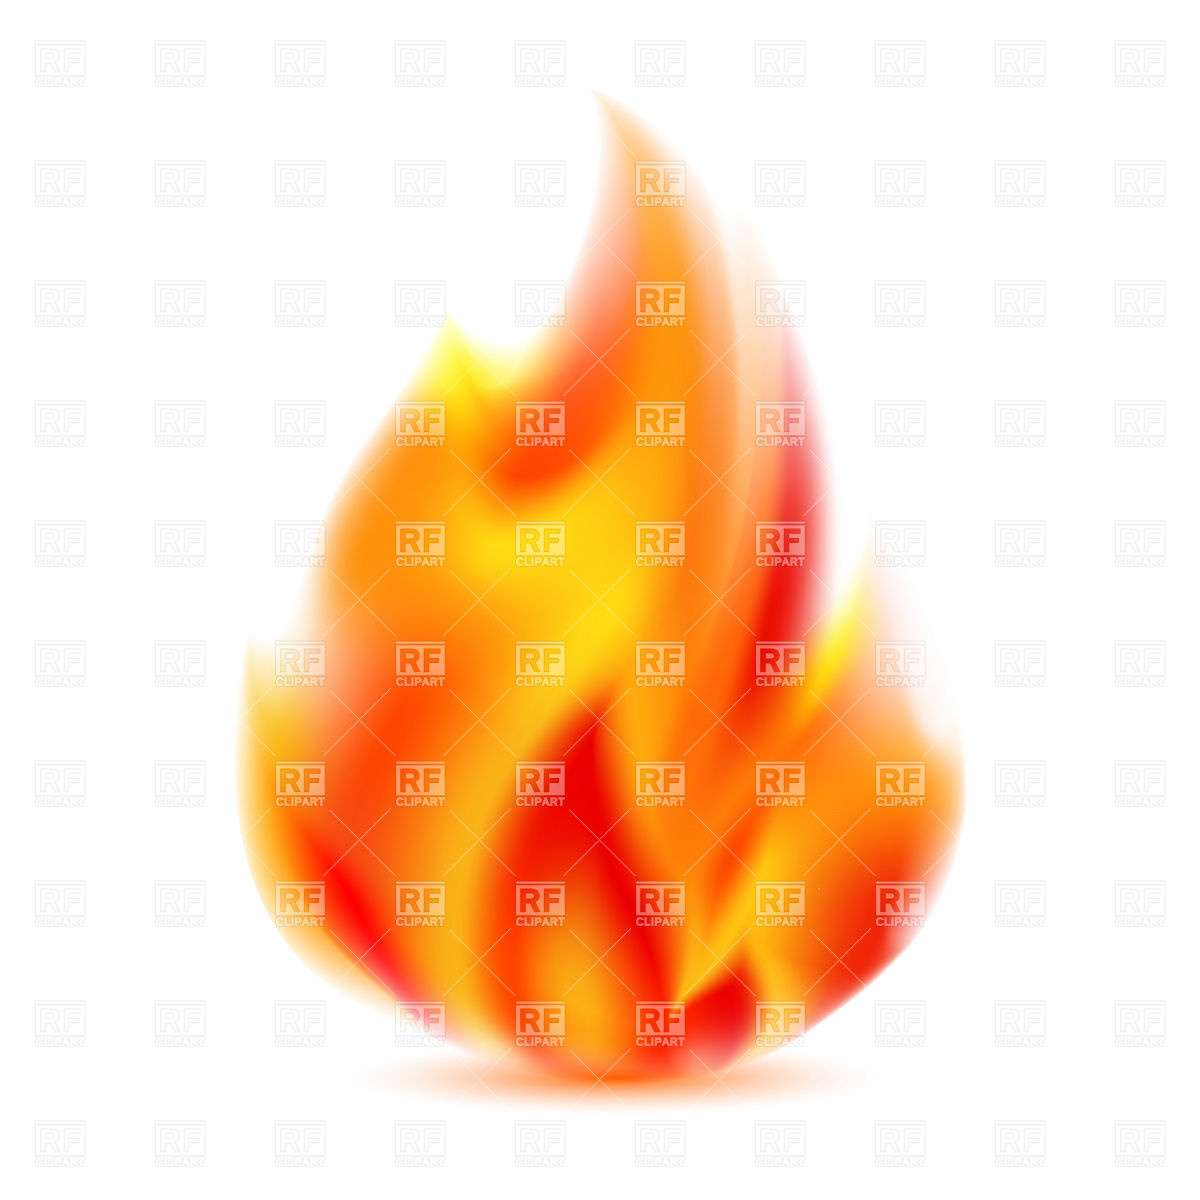 Bright Flame On White Background Download Royalty Free Vector Clipart